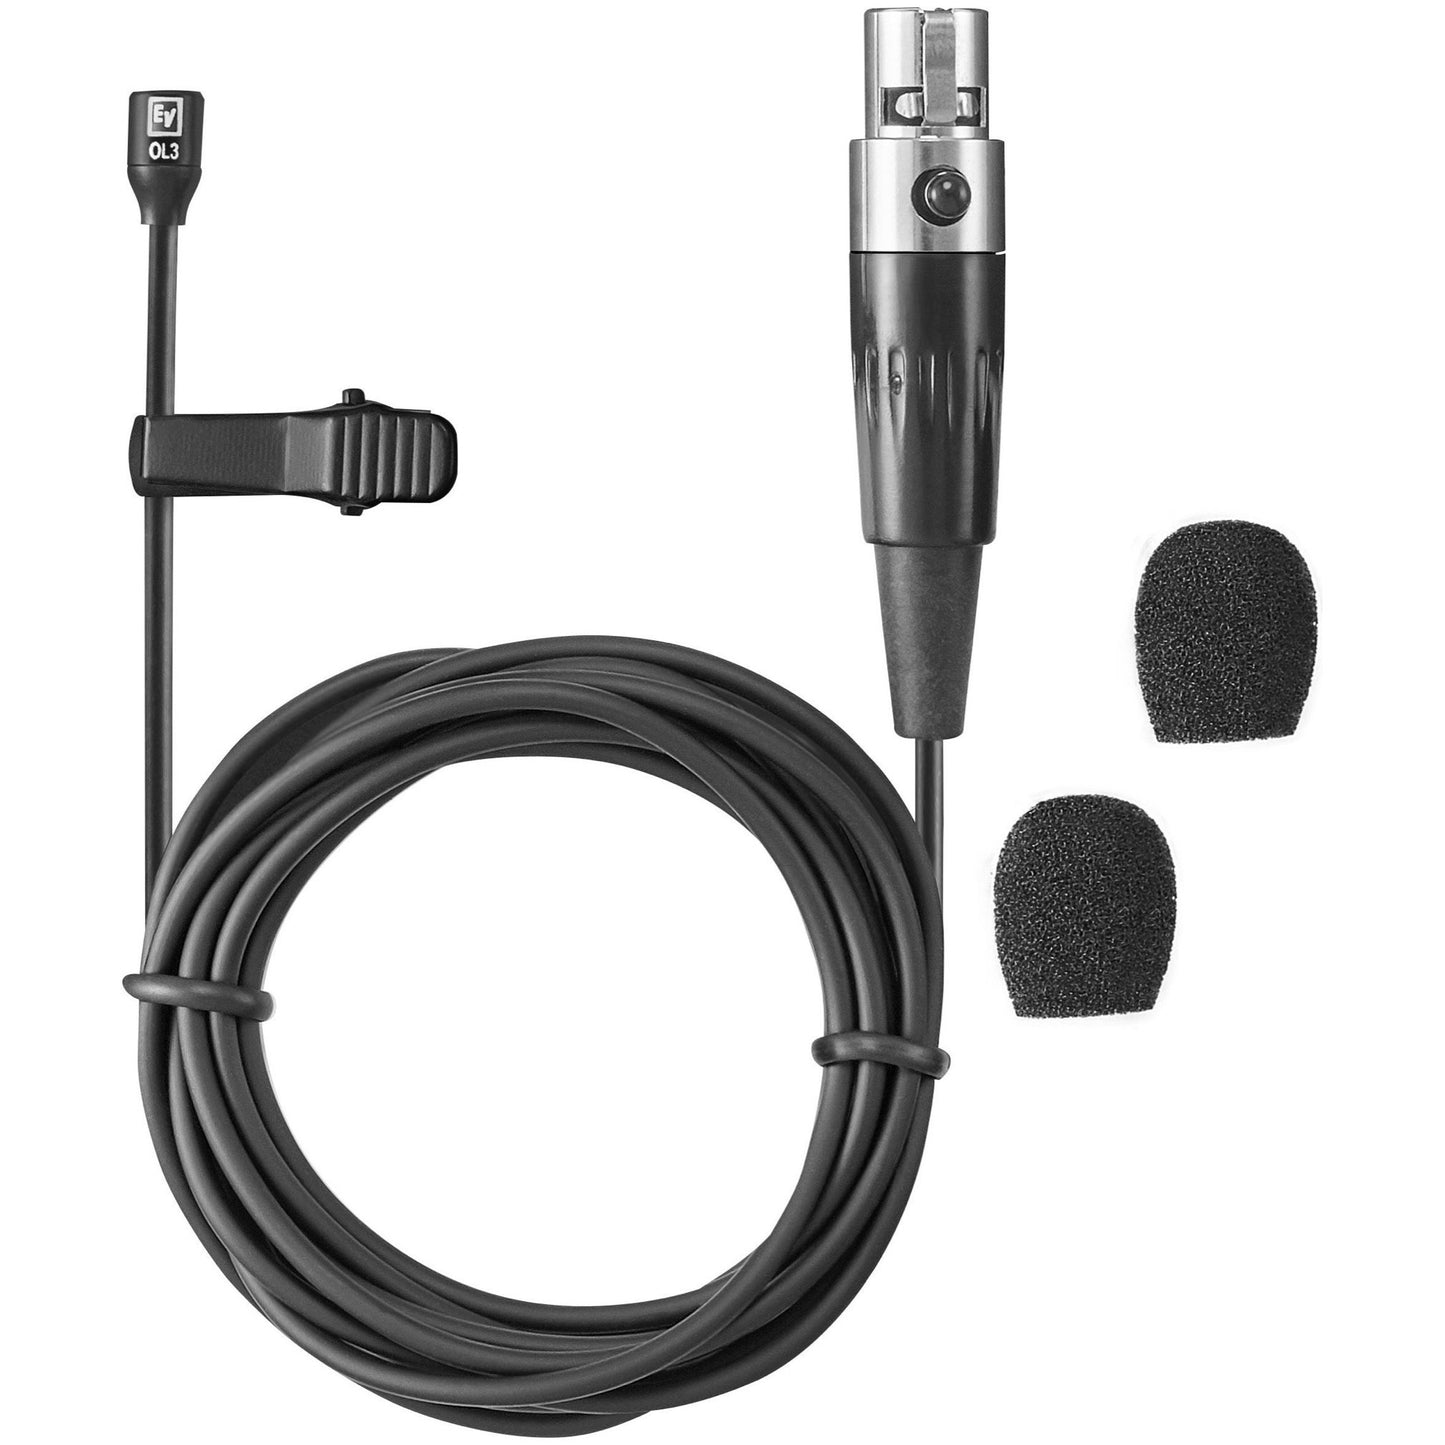 Electro-Voice RE3-BPOL Wireless Omnidirectional Lavalier Microphone System, Band 6M (653-663 MHz)